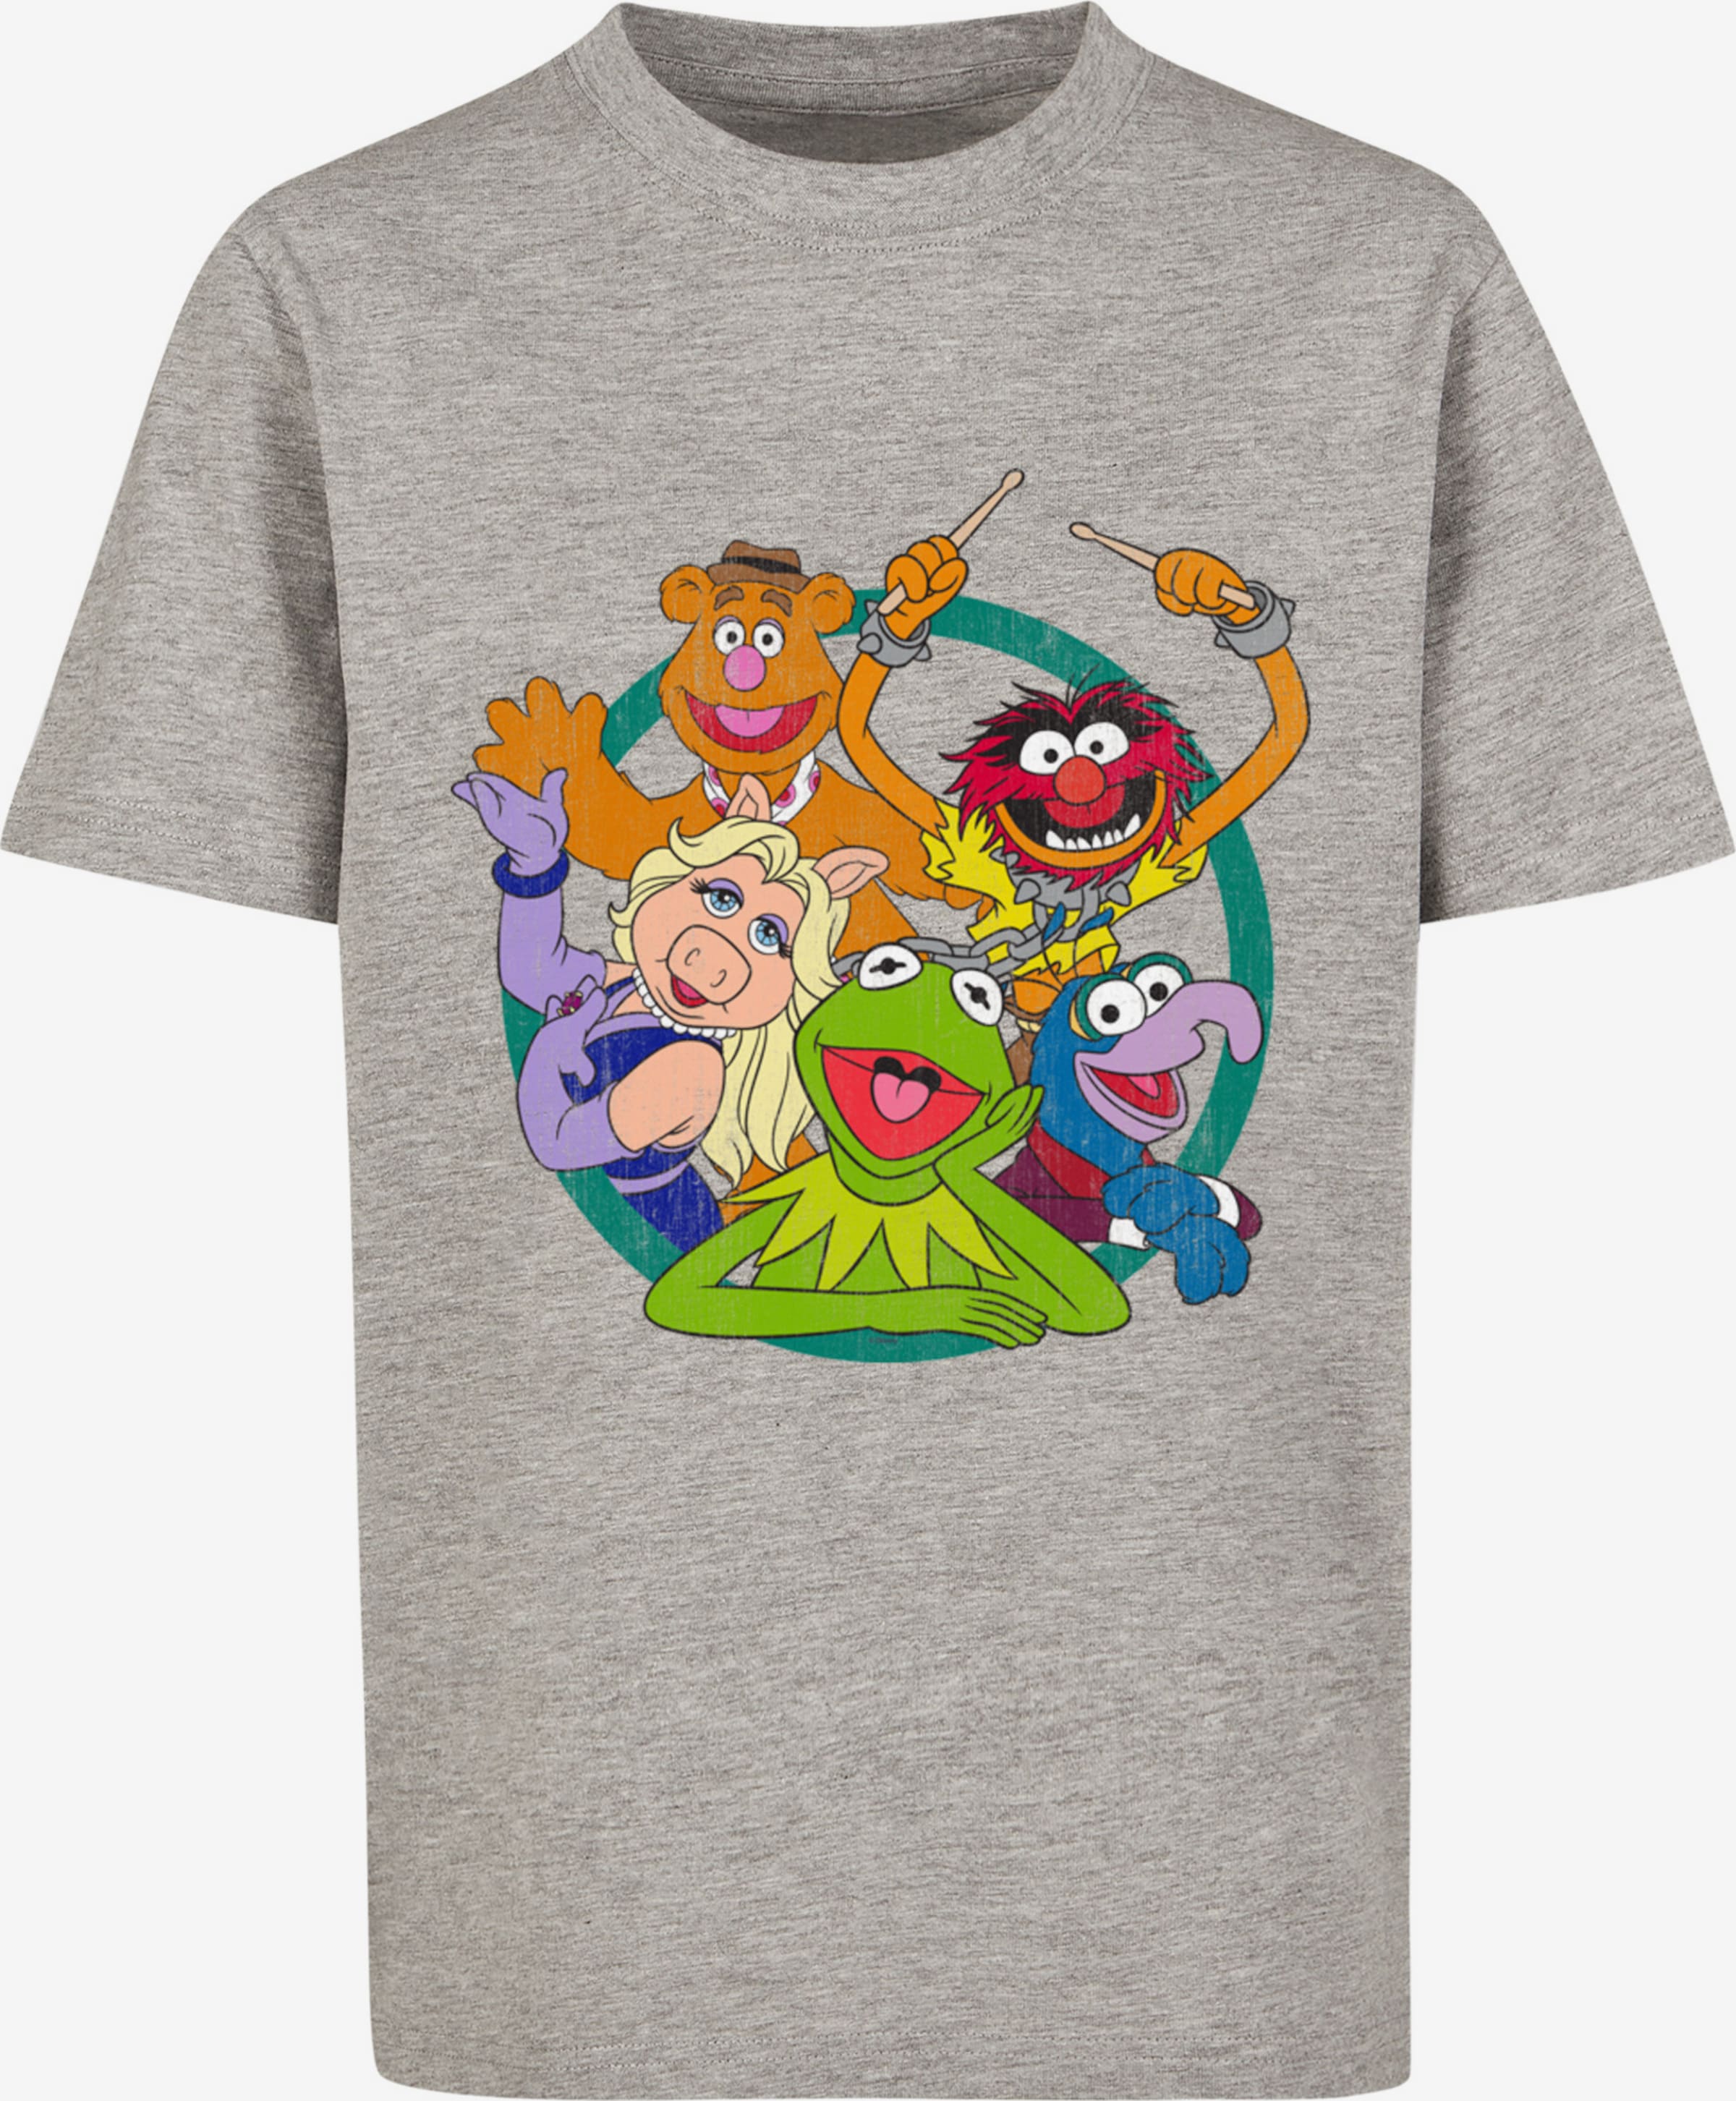 F4NT4STIC T-Shirt \'Disney The Muppets Group Circle\' in Graumeliert | ABOUT  YOU | T-Shirts